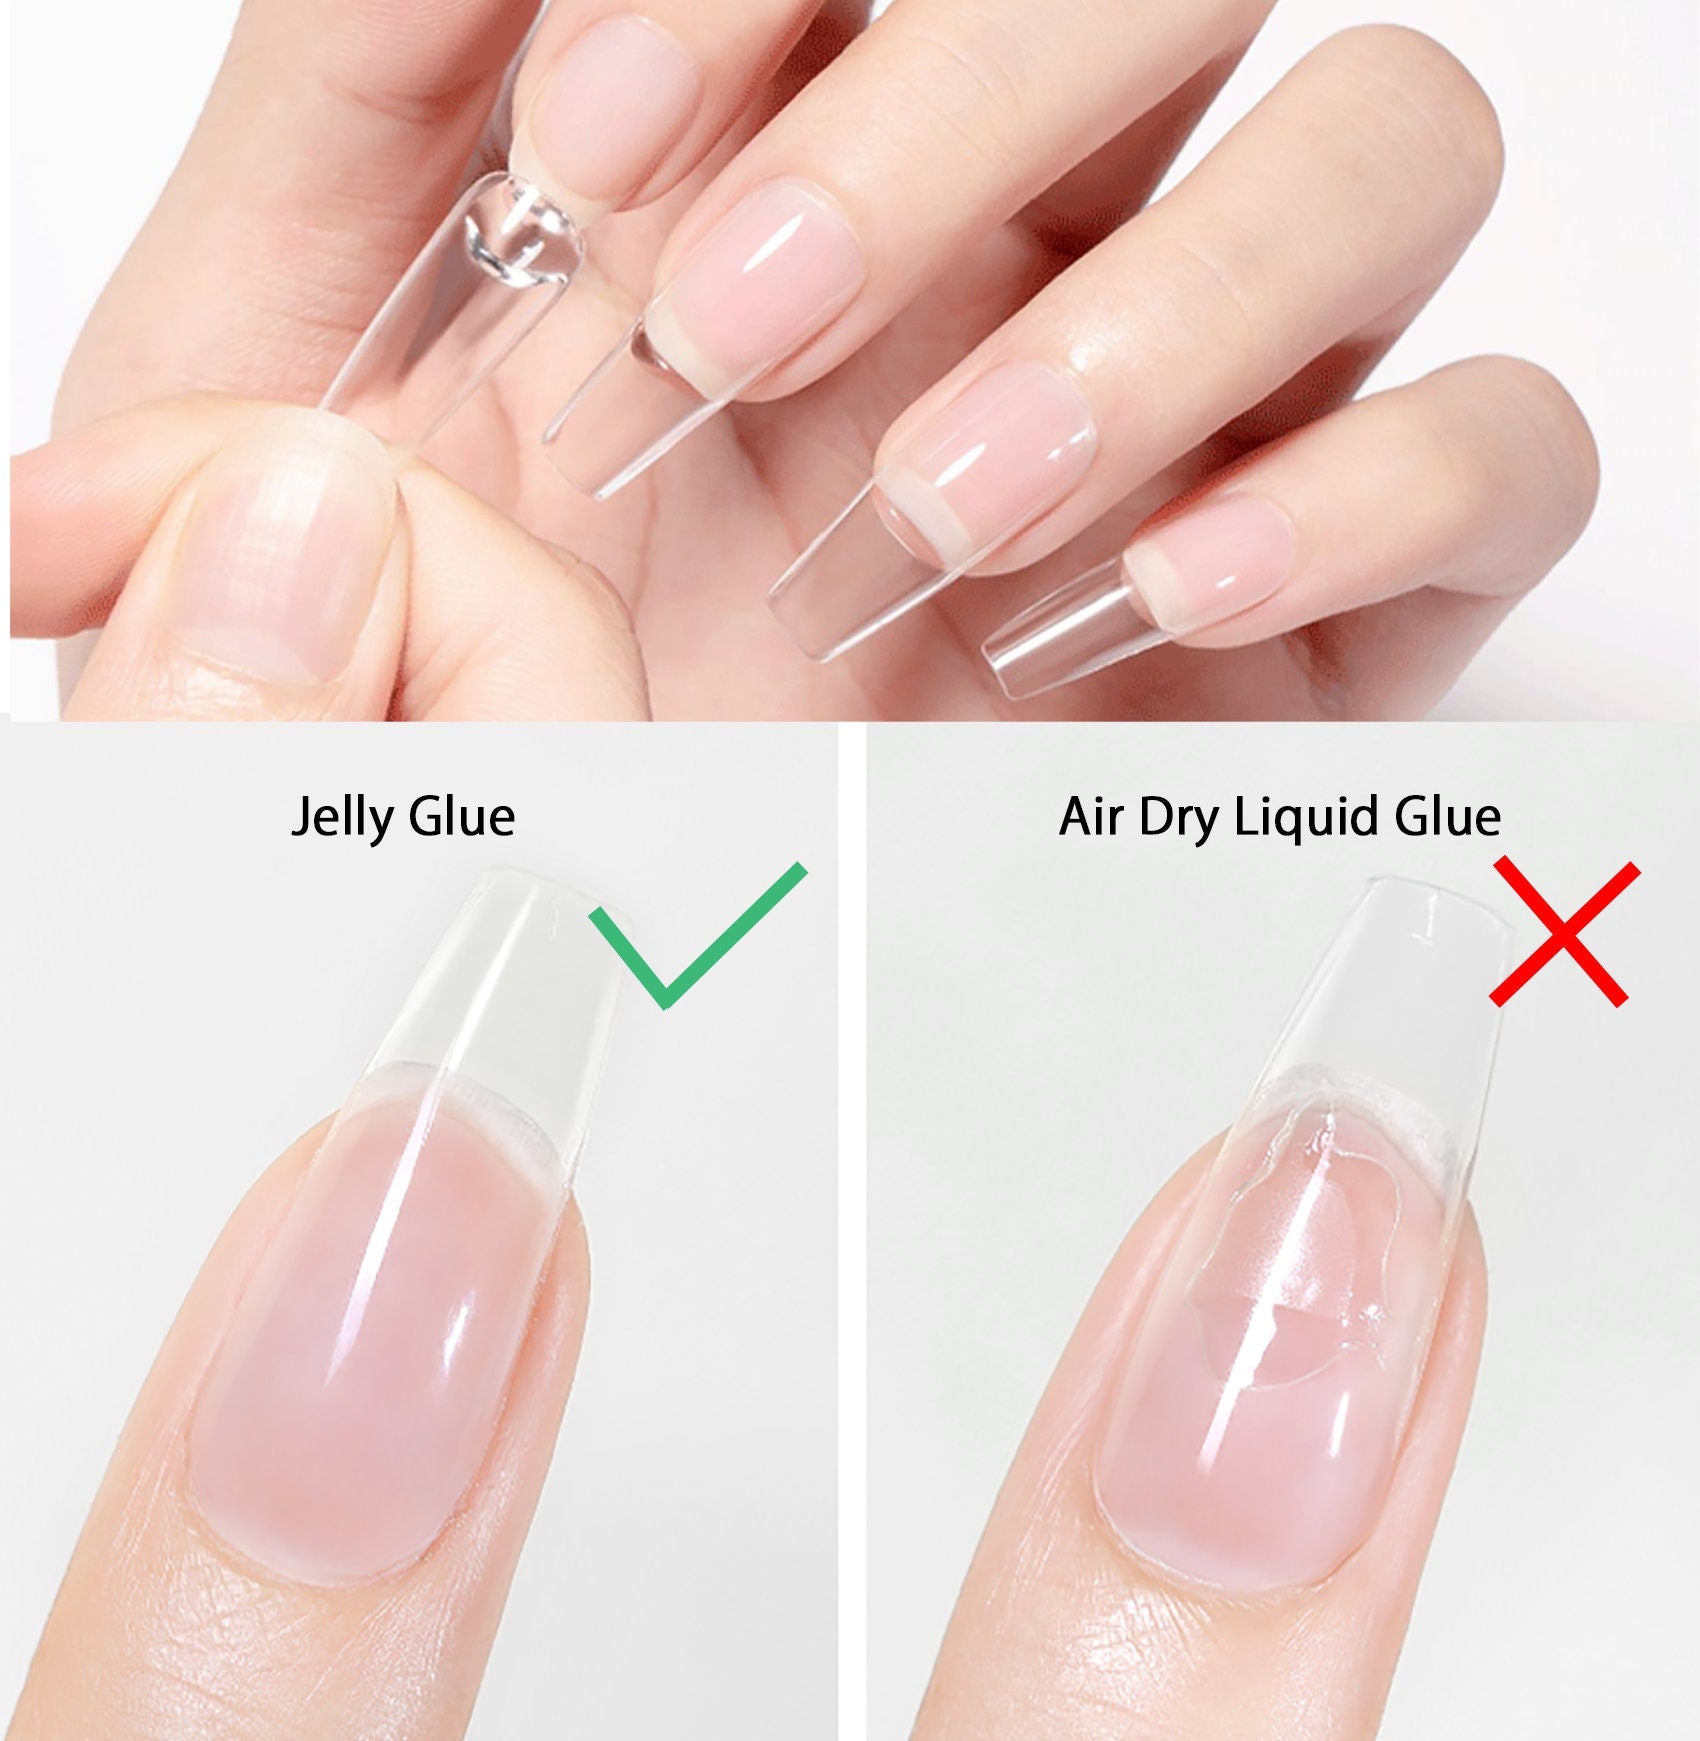 Neglur titibeauty - Clear gel nail cover looks natural | Facebook